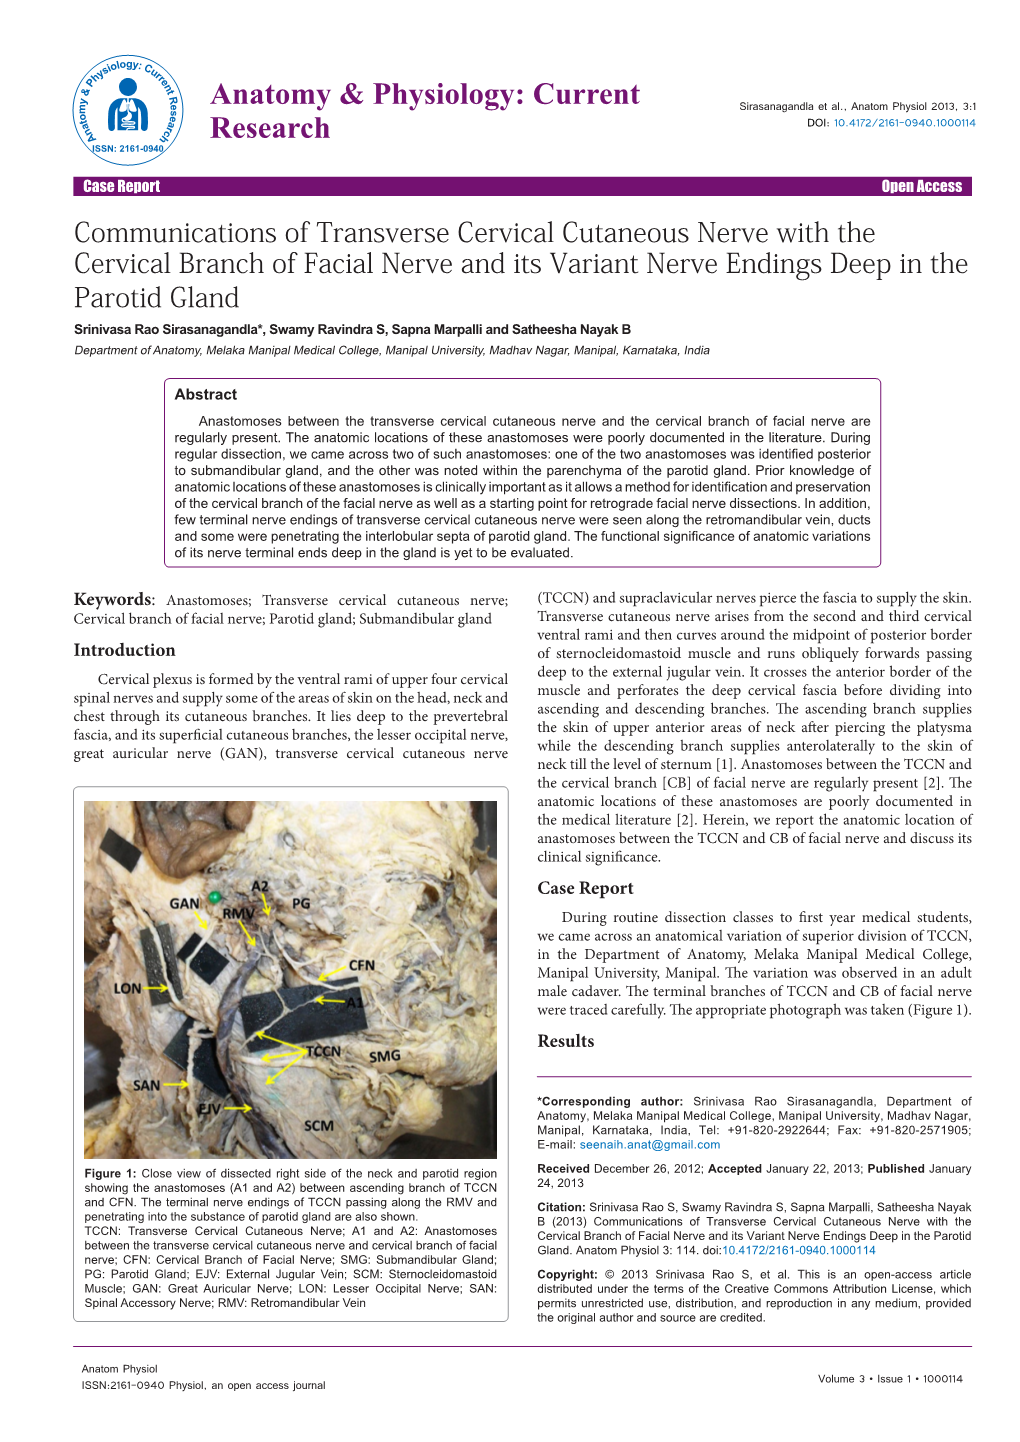 Communications of Transverse Cervical Cutaneous Nerve with the Cervical Branch of Facial Nerve and Its Variant Nerve Endings